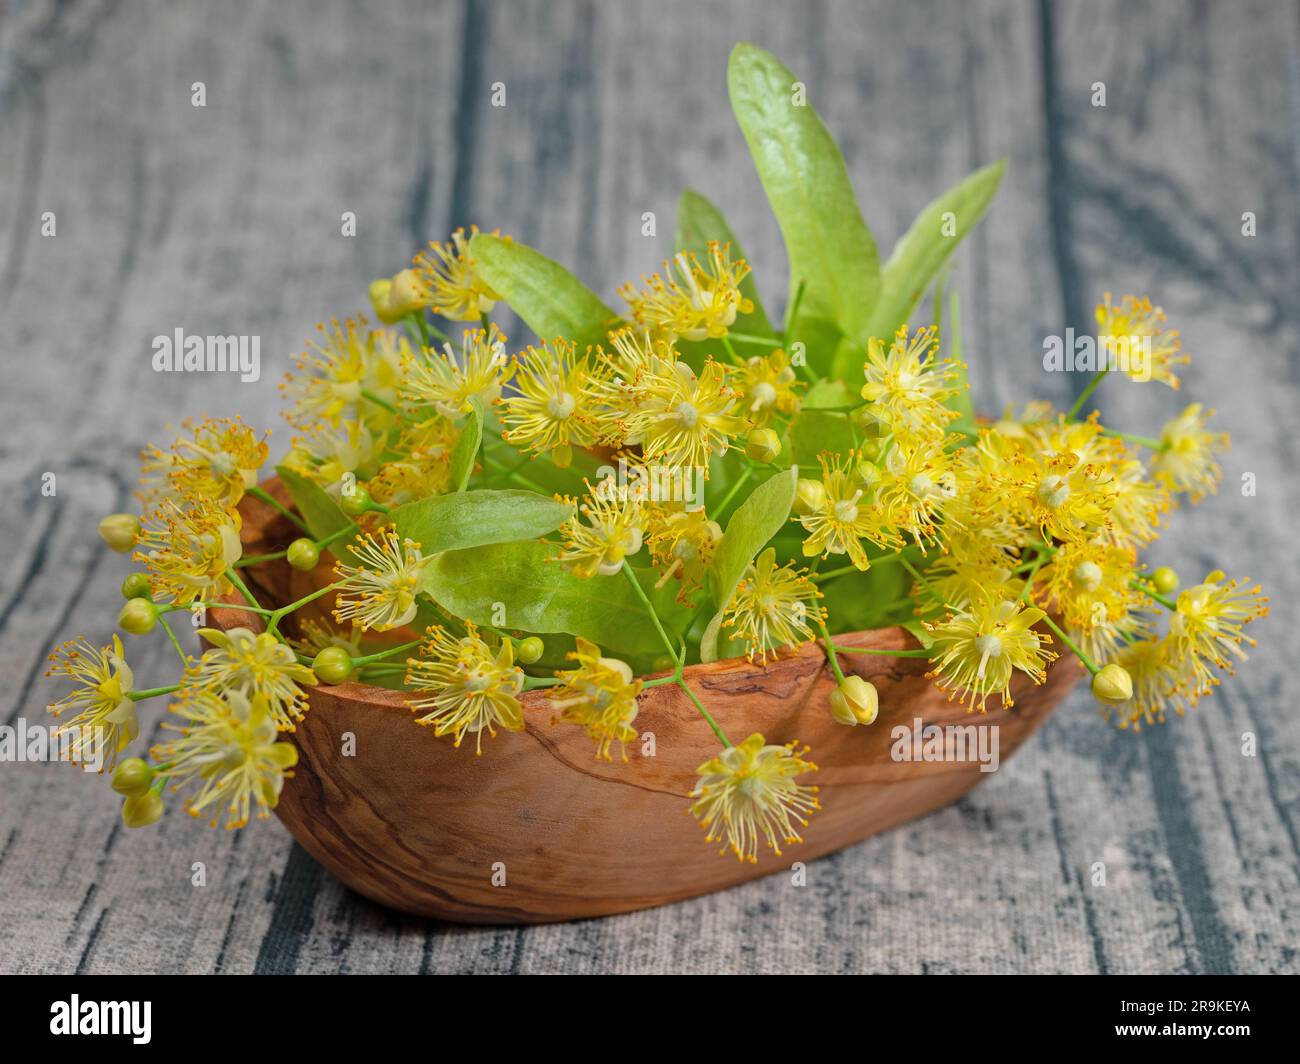 Linden blossoms in a wooden bowl Stock Photo